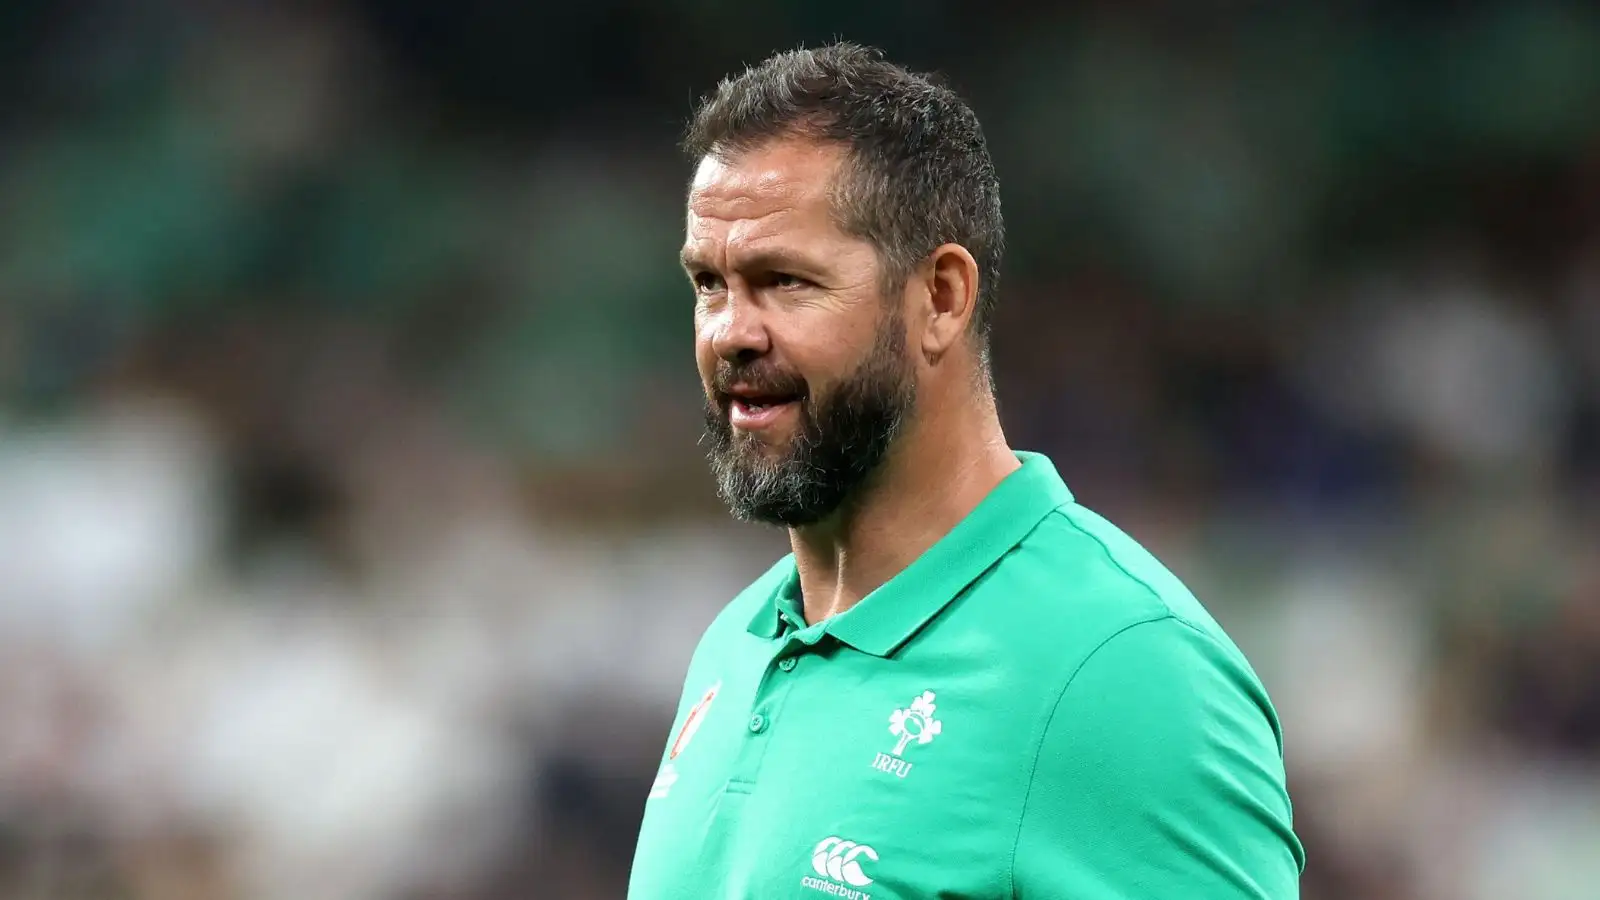 Wigan Warriors icon Andy Farrell named British and Irish Lions head coach: ‘One of the best in the world’